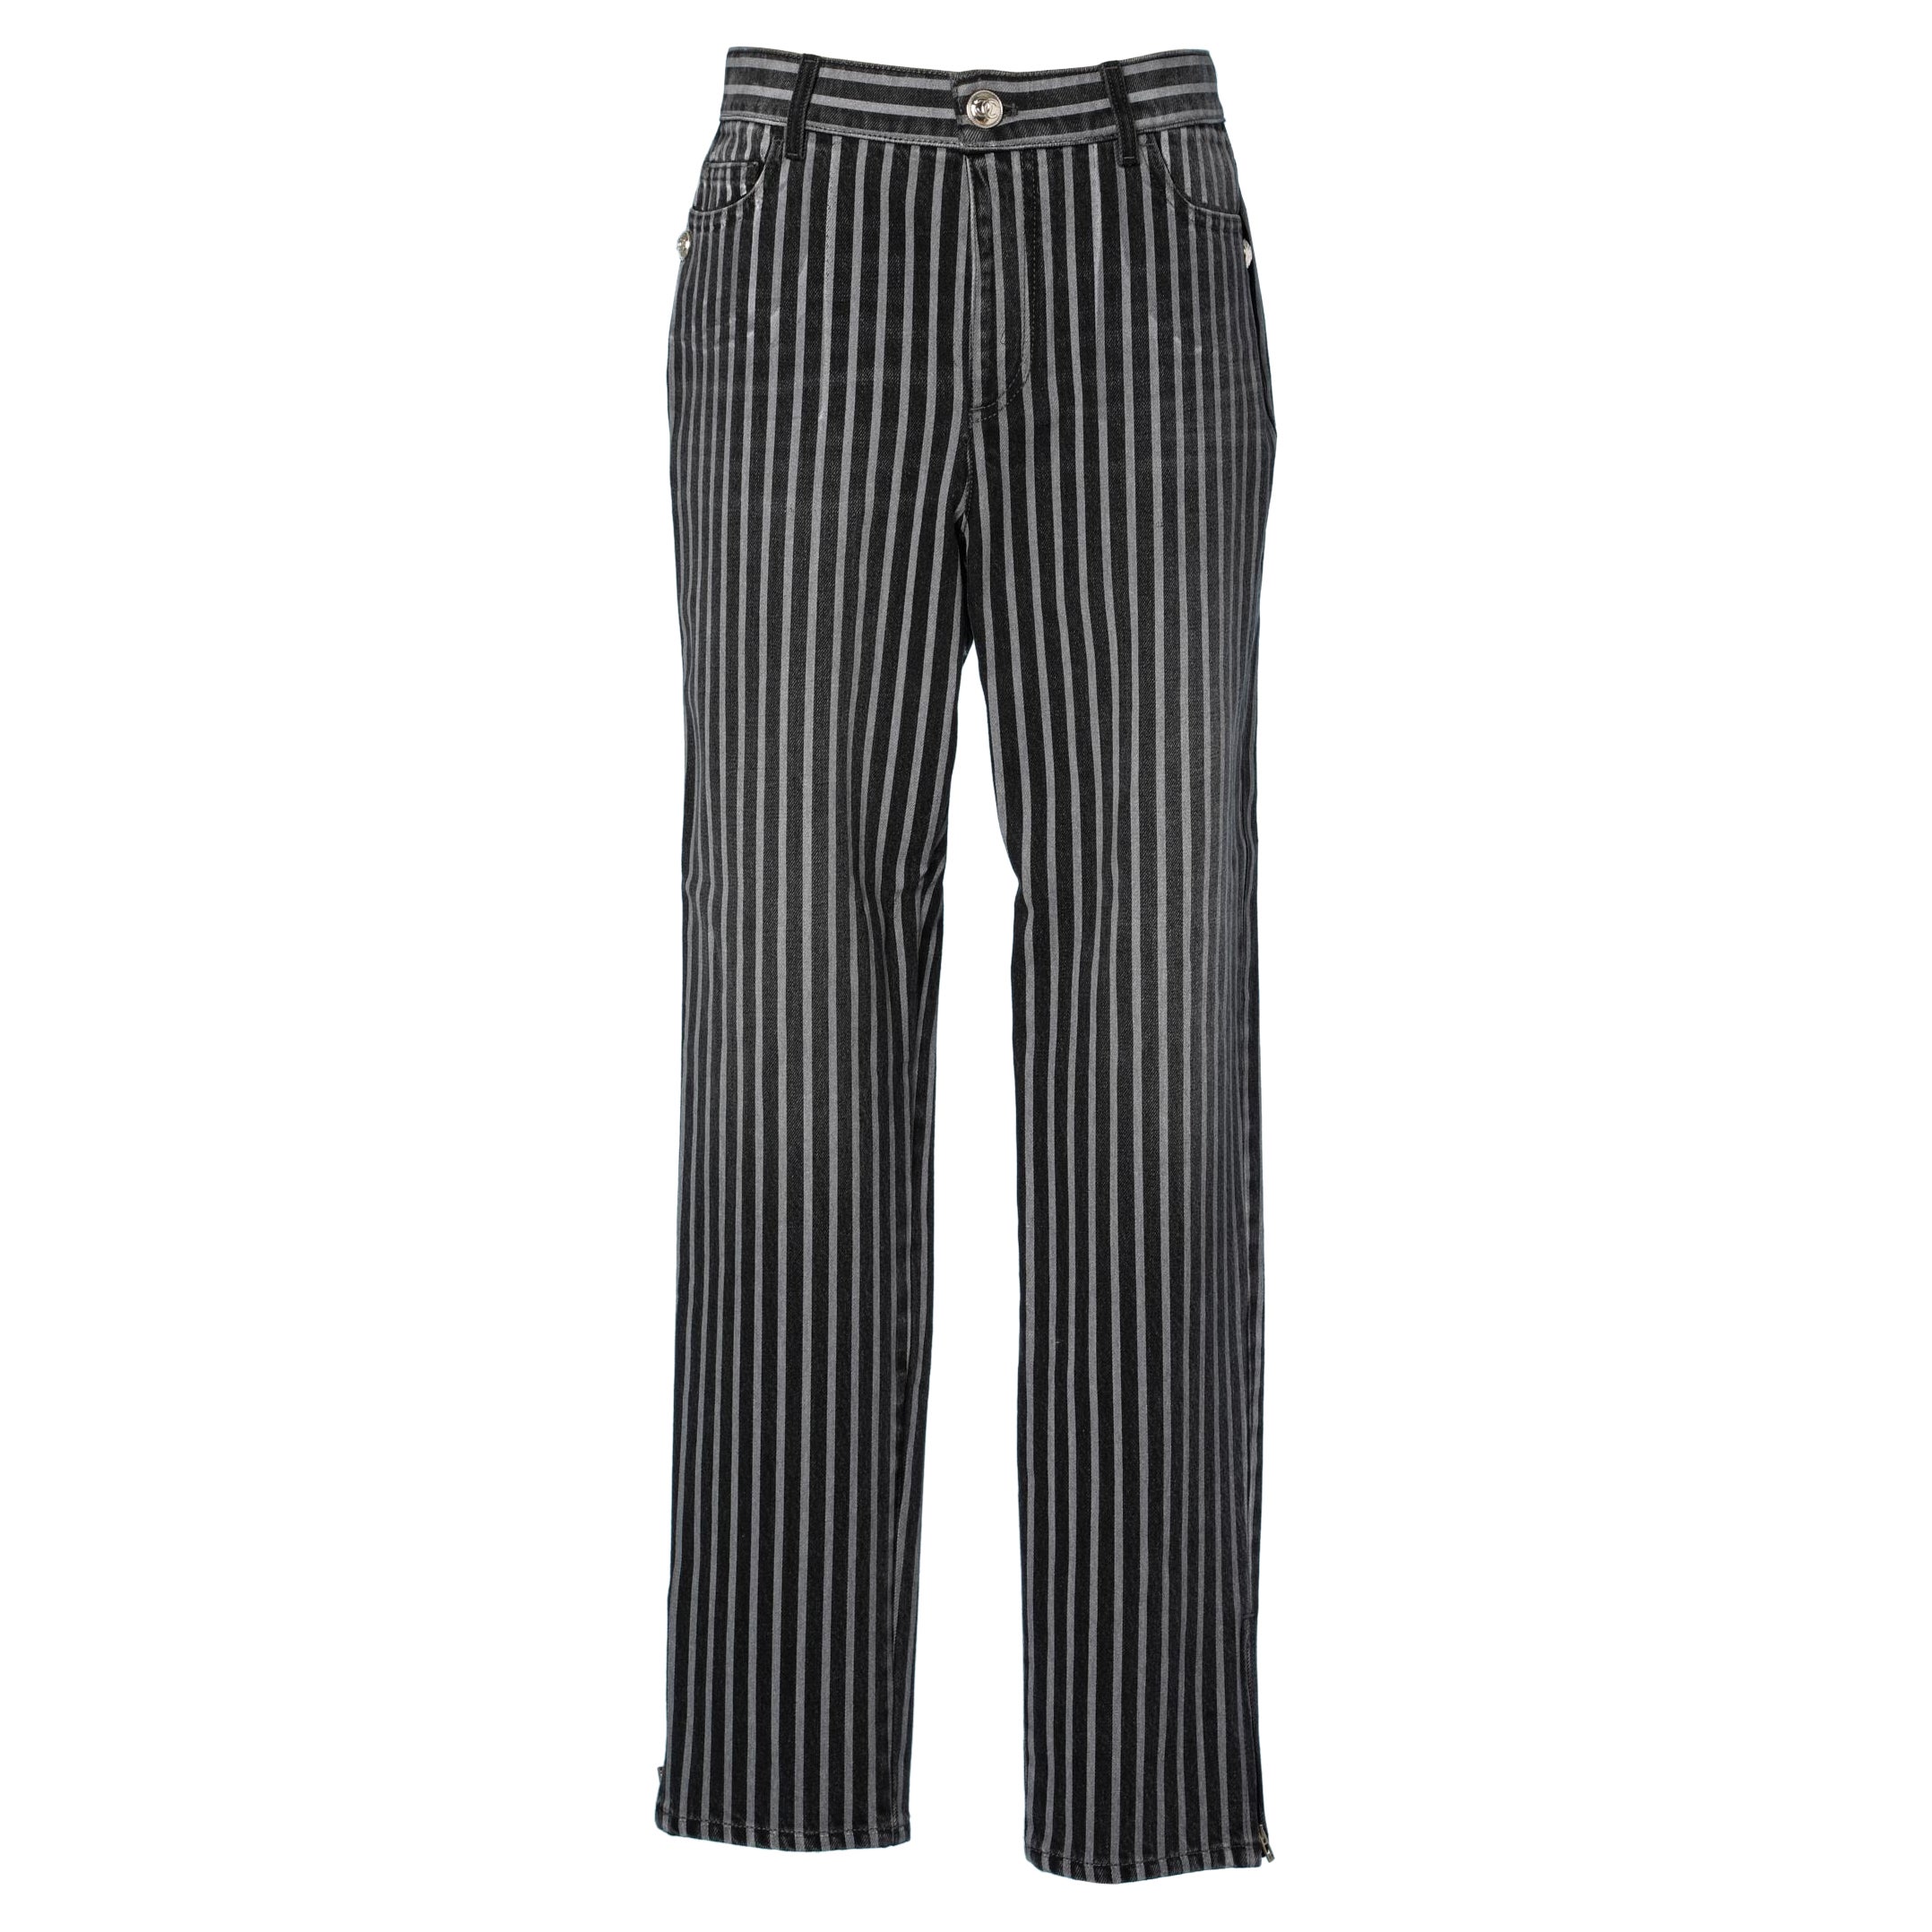 Striped denim pants with branded buttons Chanel 